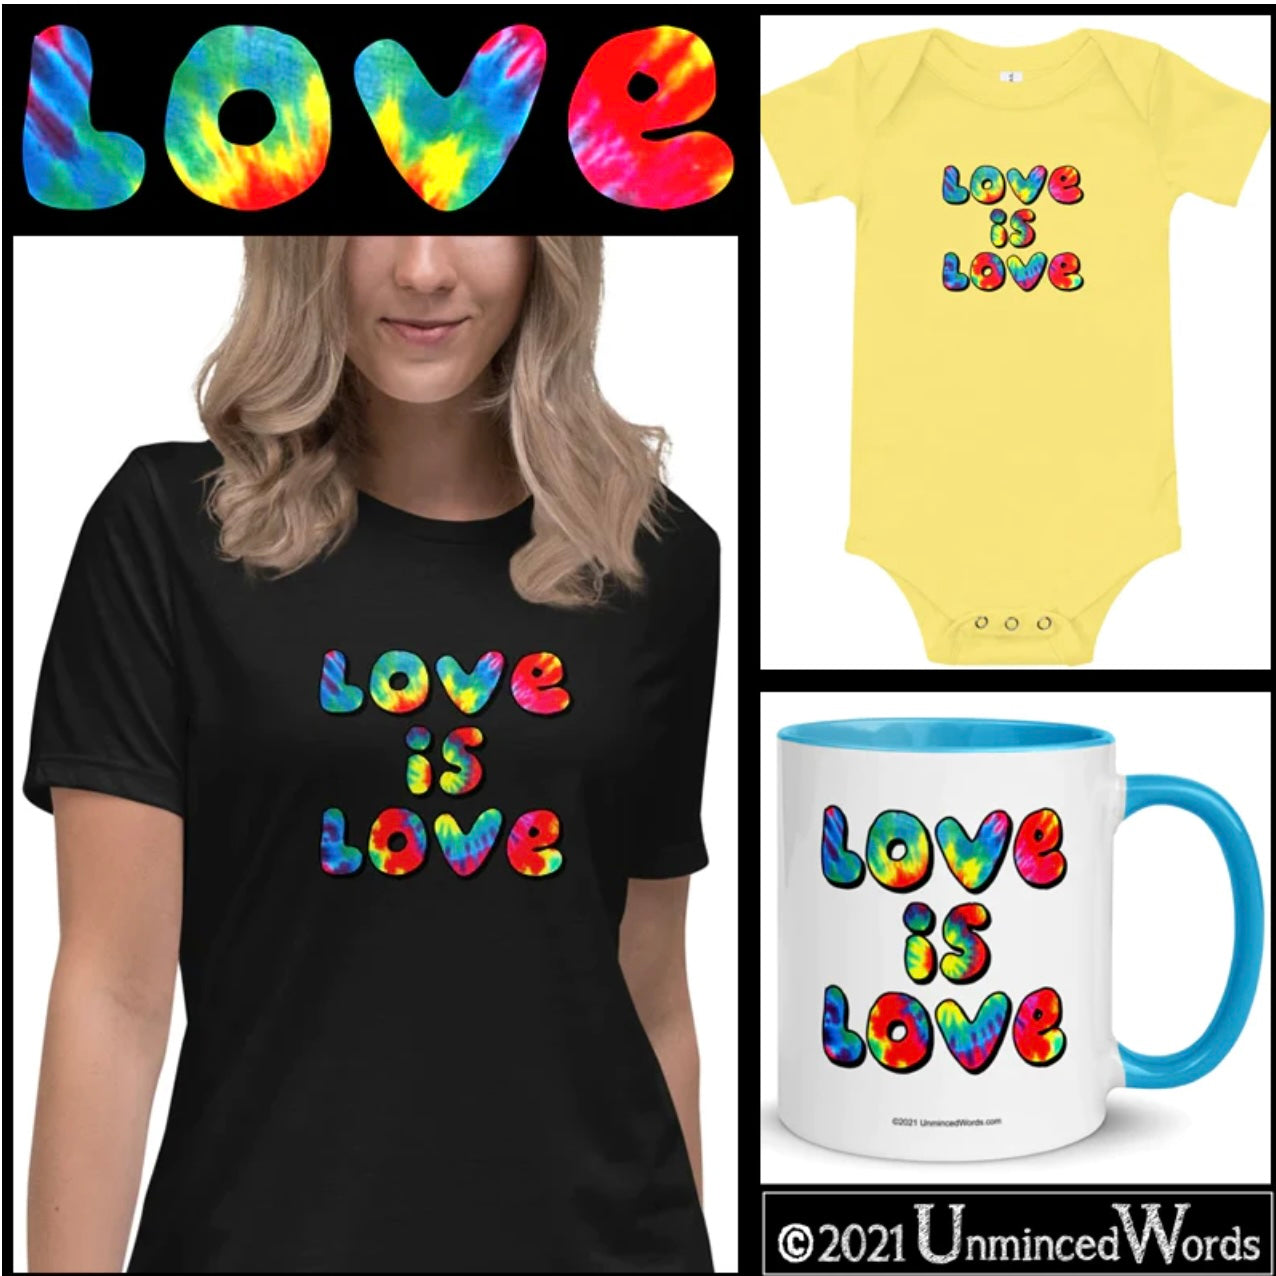 Love is Love is our message and collection